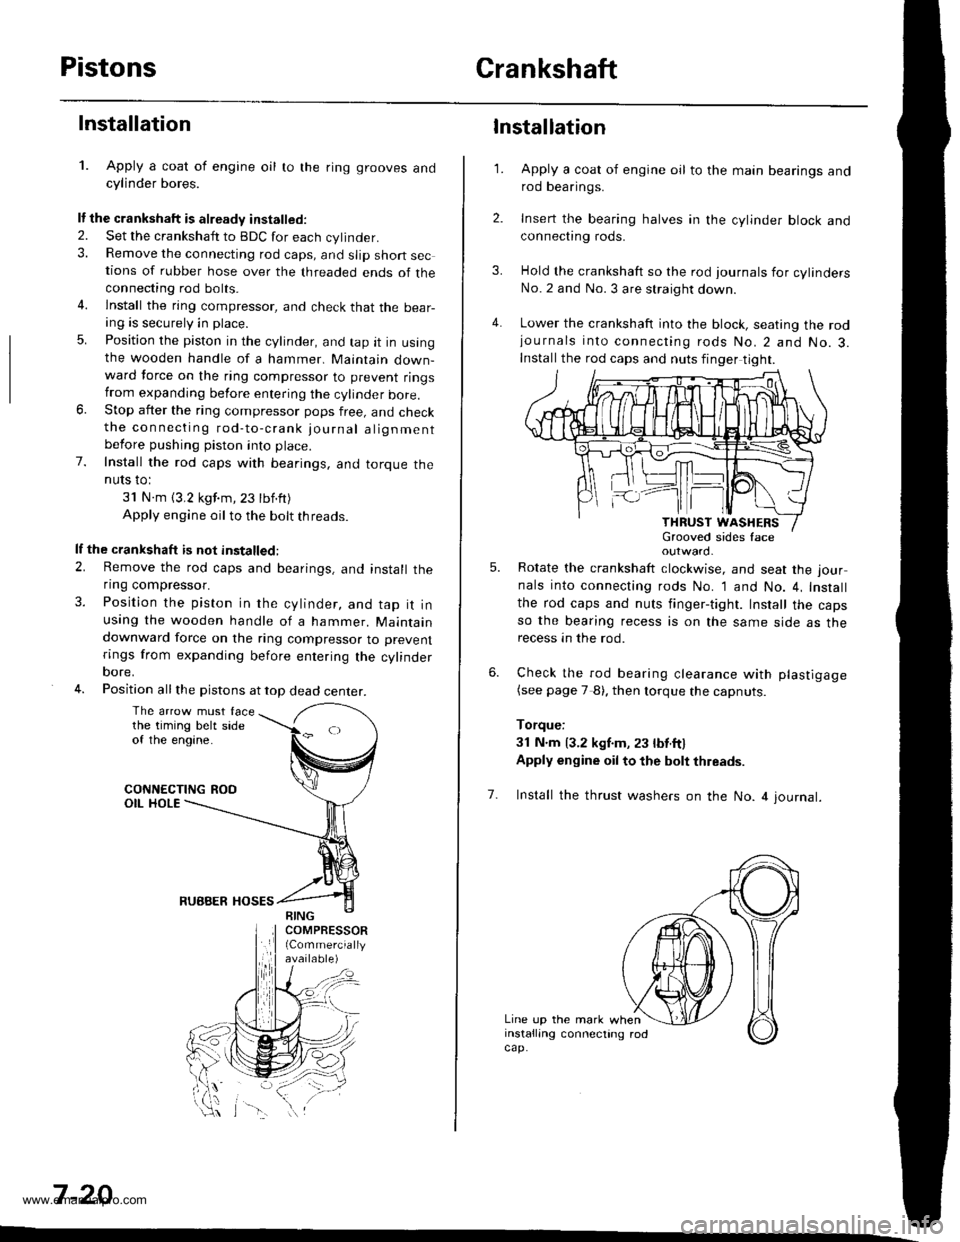 HONDA CR-V 1998 RD1-RD3 / 1.G Workshop Manual 
PistonsCrankshaft
Installation
1. Apply a coat of engine oil to the ring grooves andcylinder bores.
It the crankshaft is already installed.
2. Set the crankshatt to BDC for each cylinder.3. Remove th